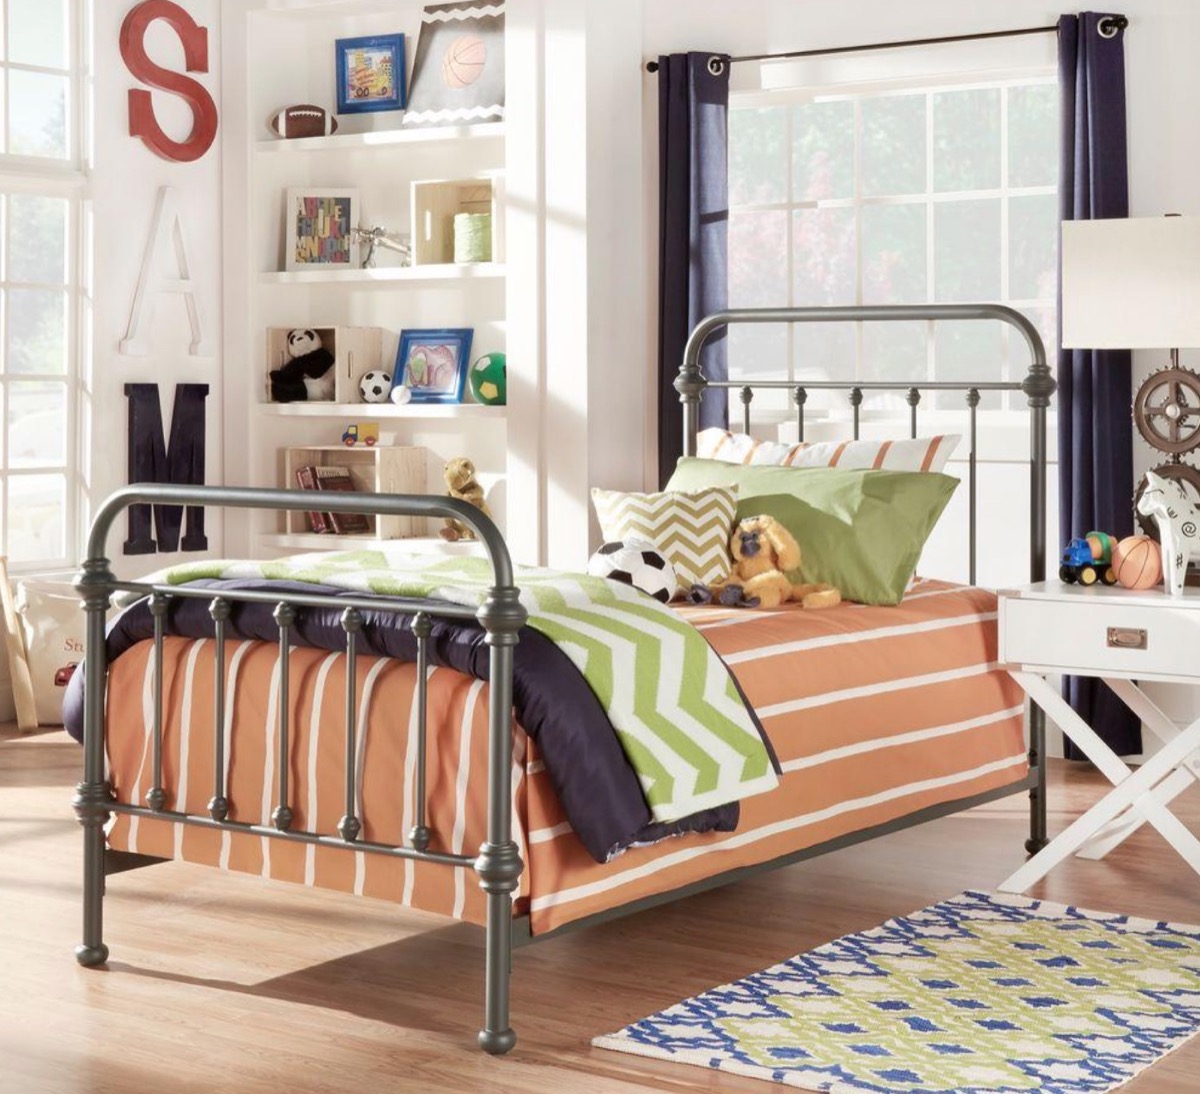 metal bed frame, old fashioned home items